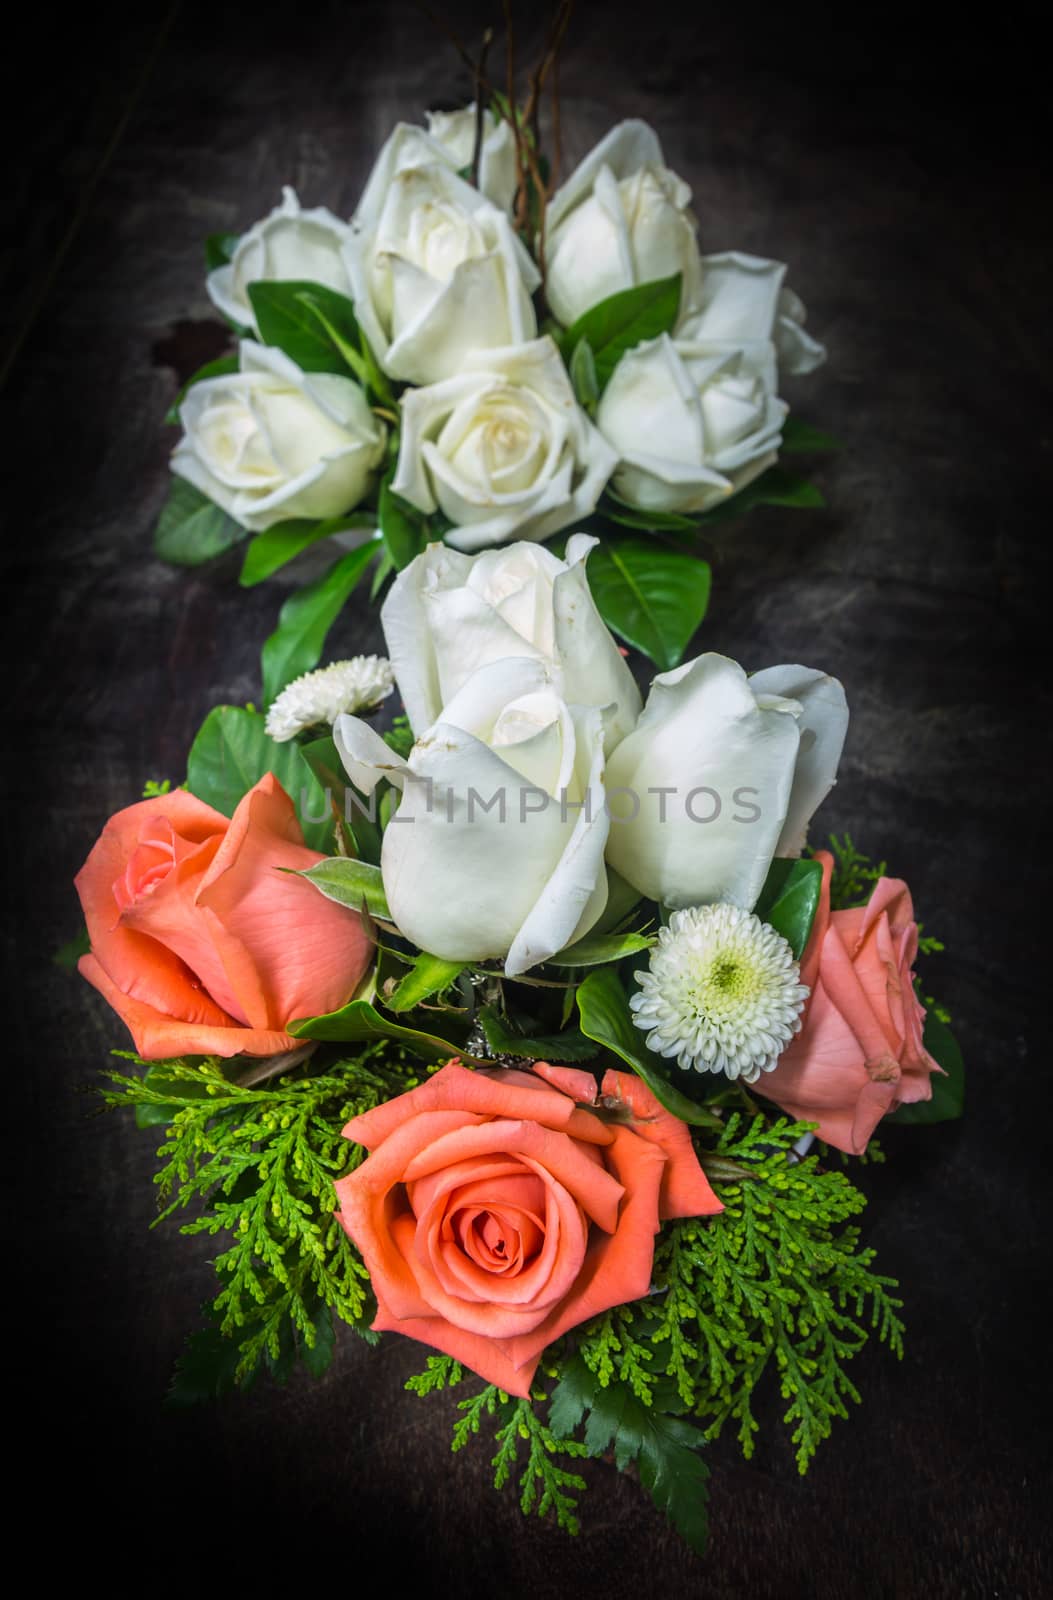 still life decorated orange and white roses